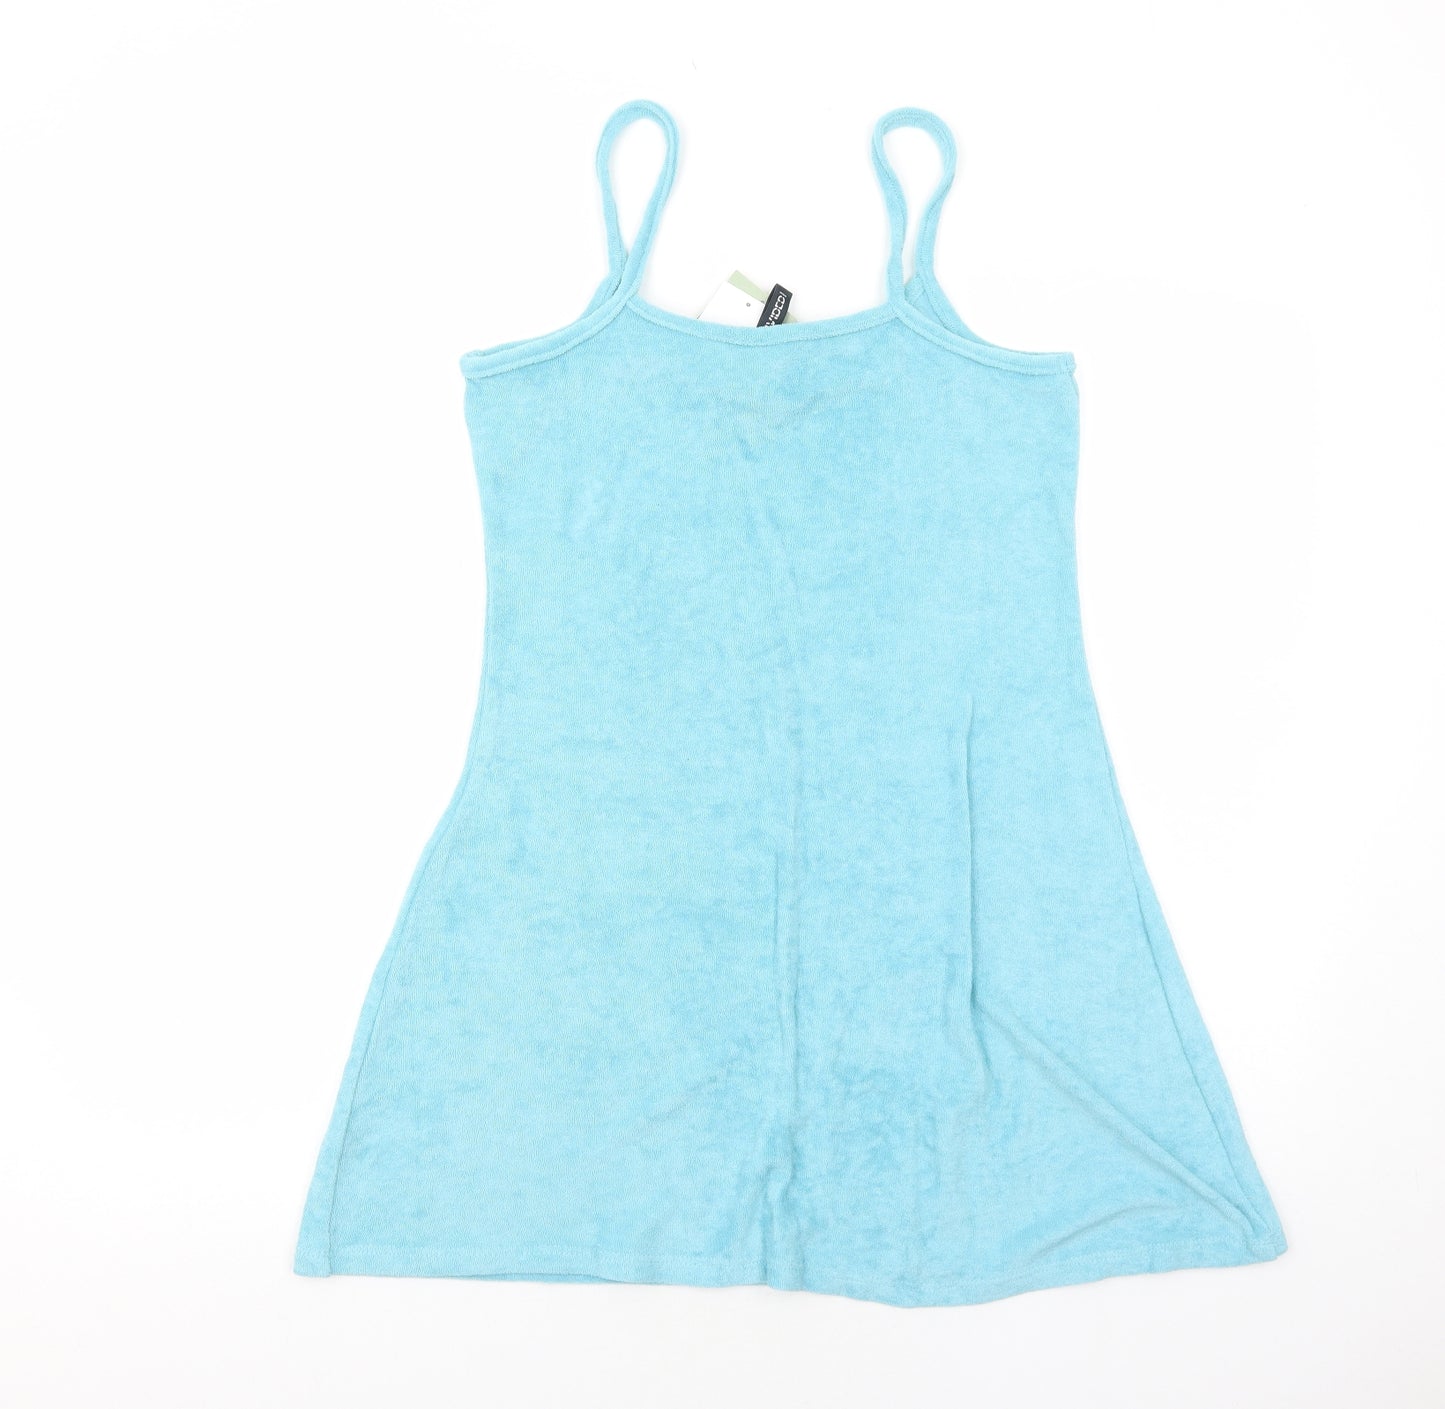 H&M Womens Blue Polyester Camisole Tank Size M Scoop Neck